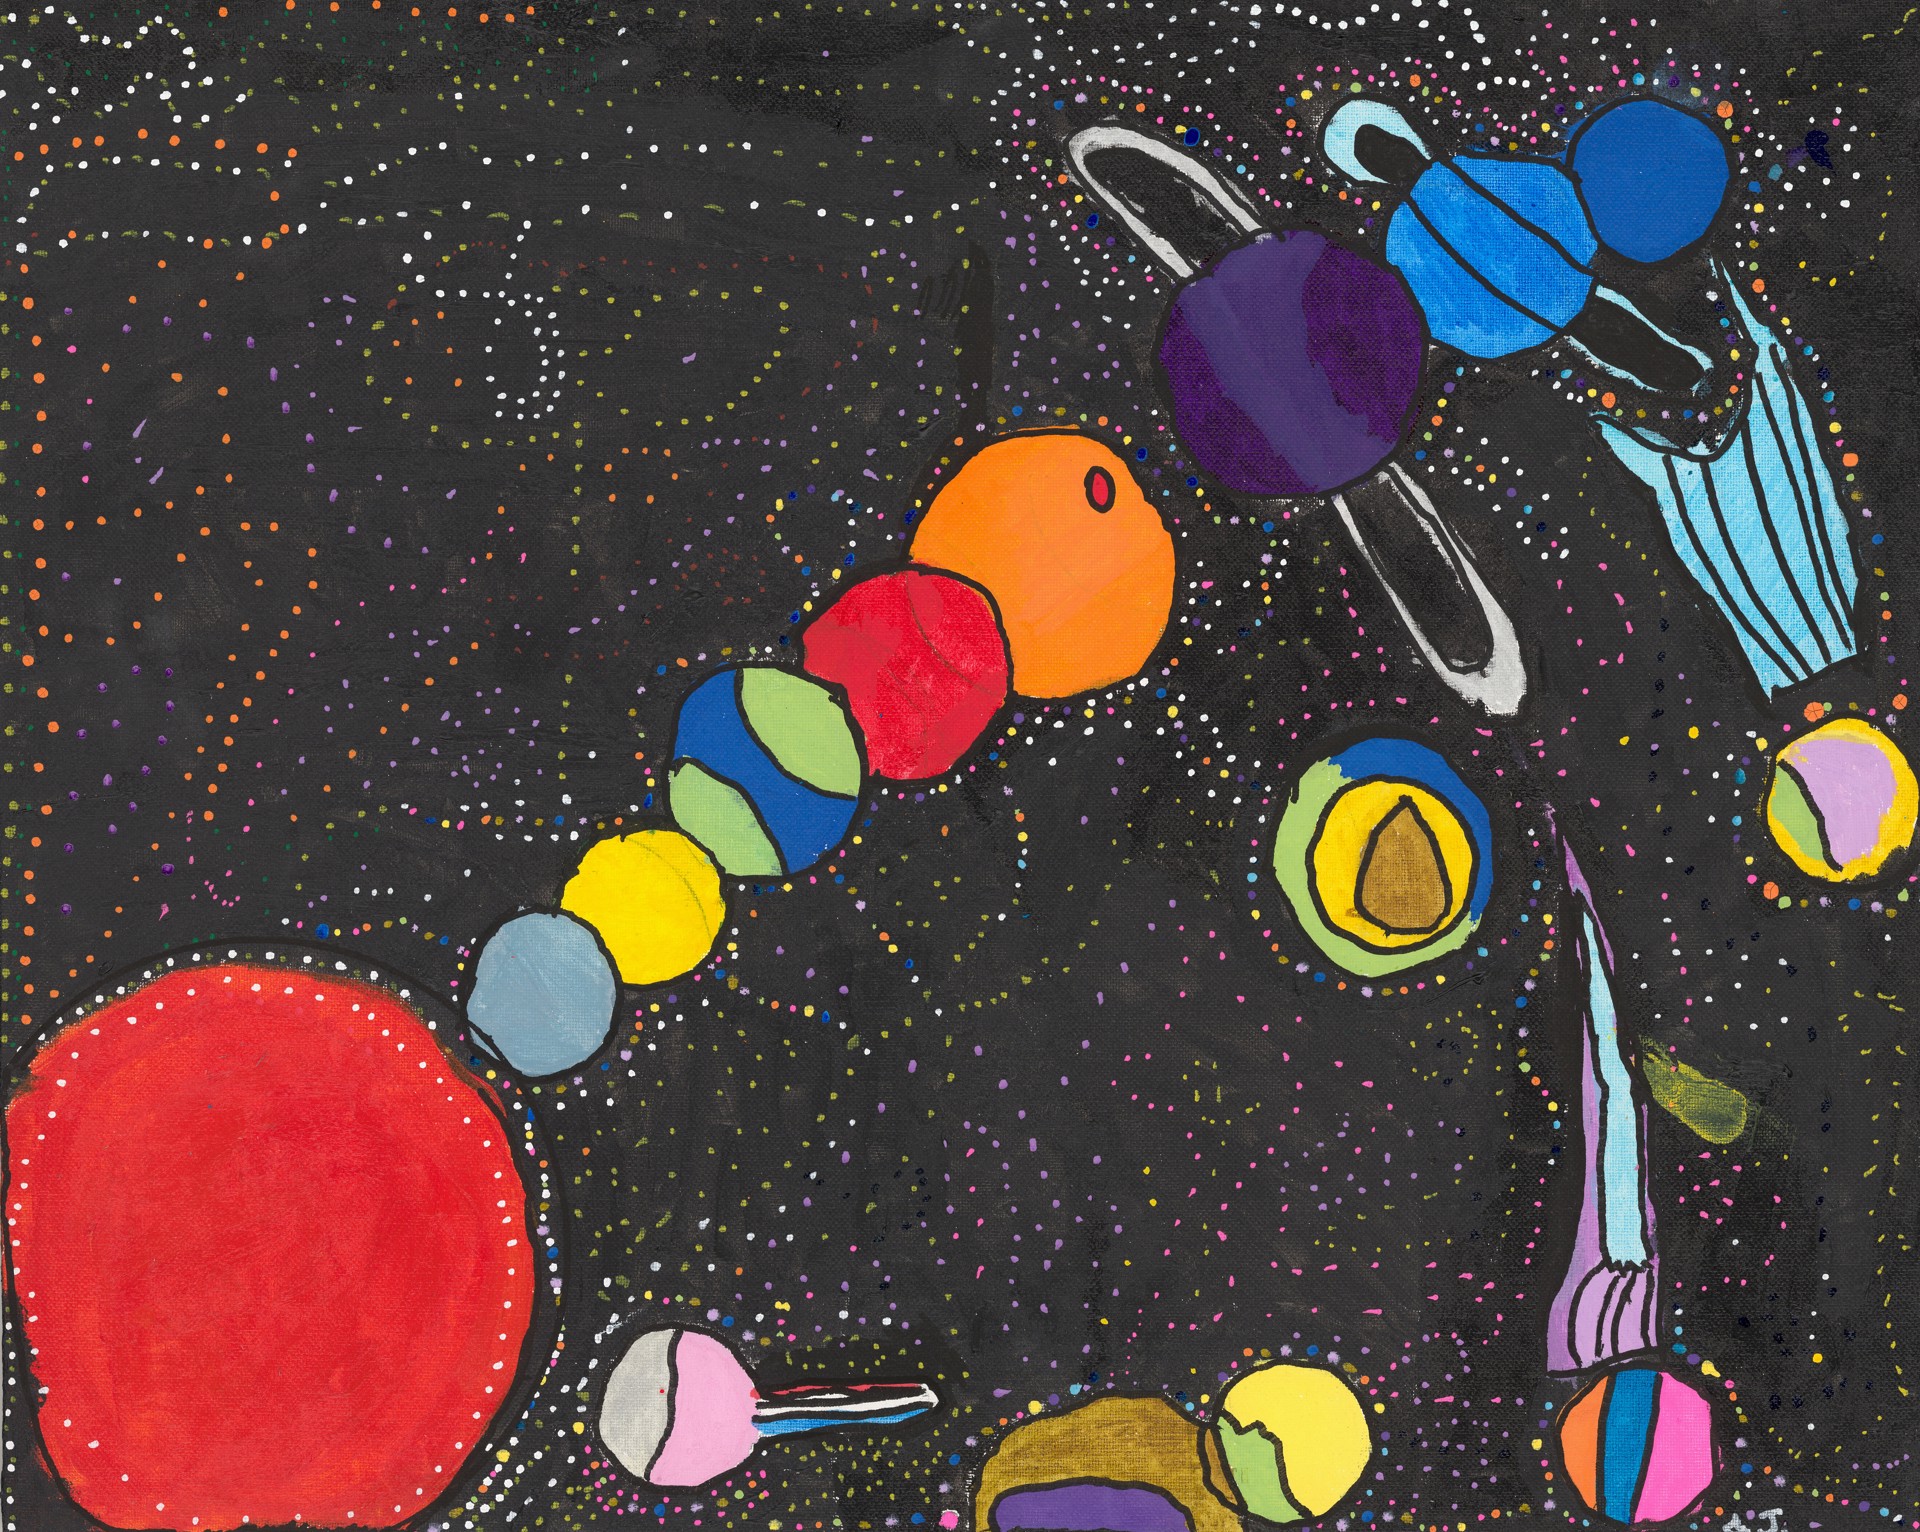 Eight Planets of the Solar System by Charmaine Jones